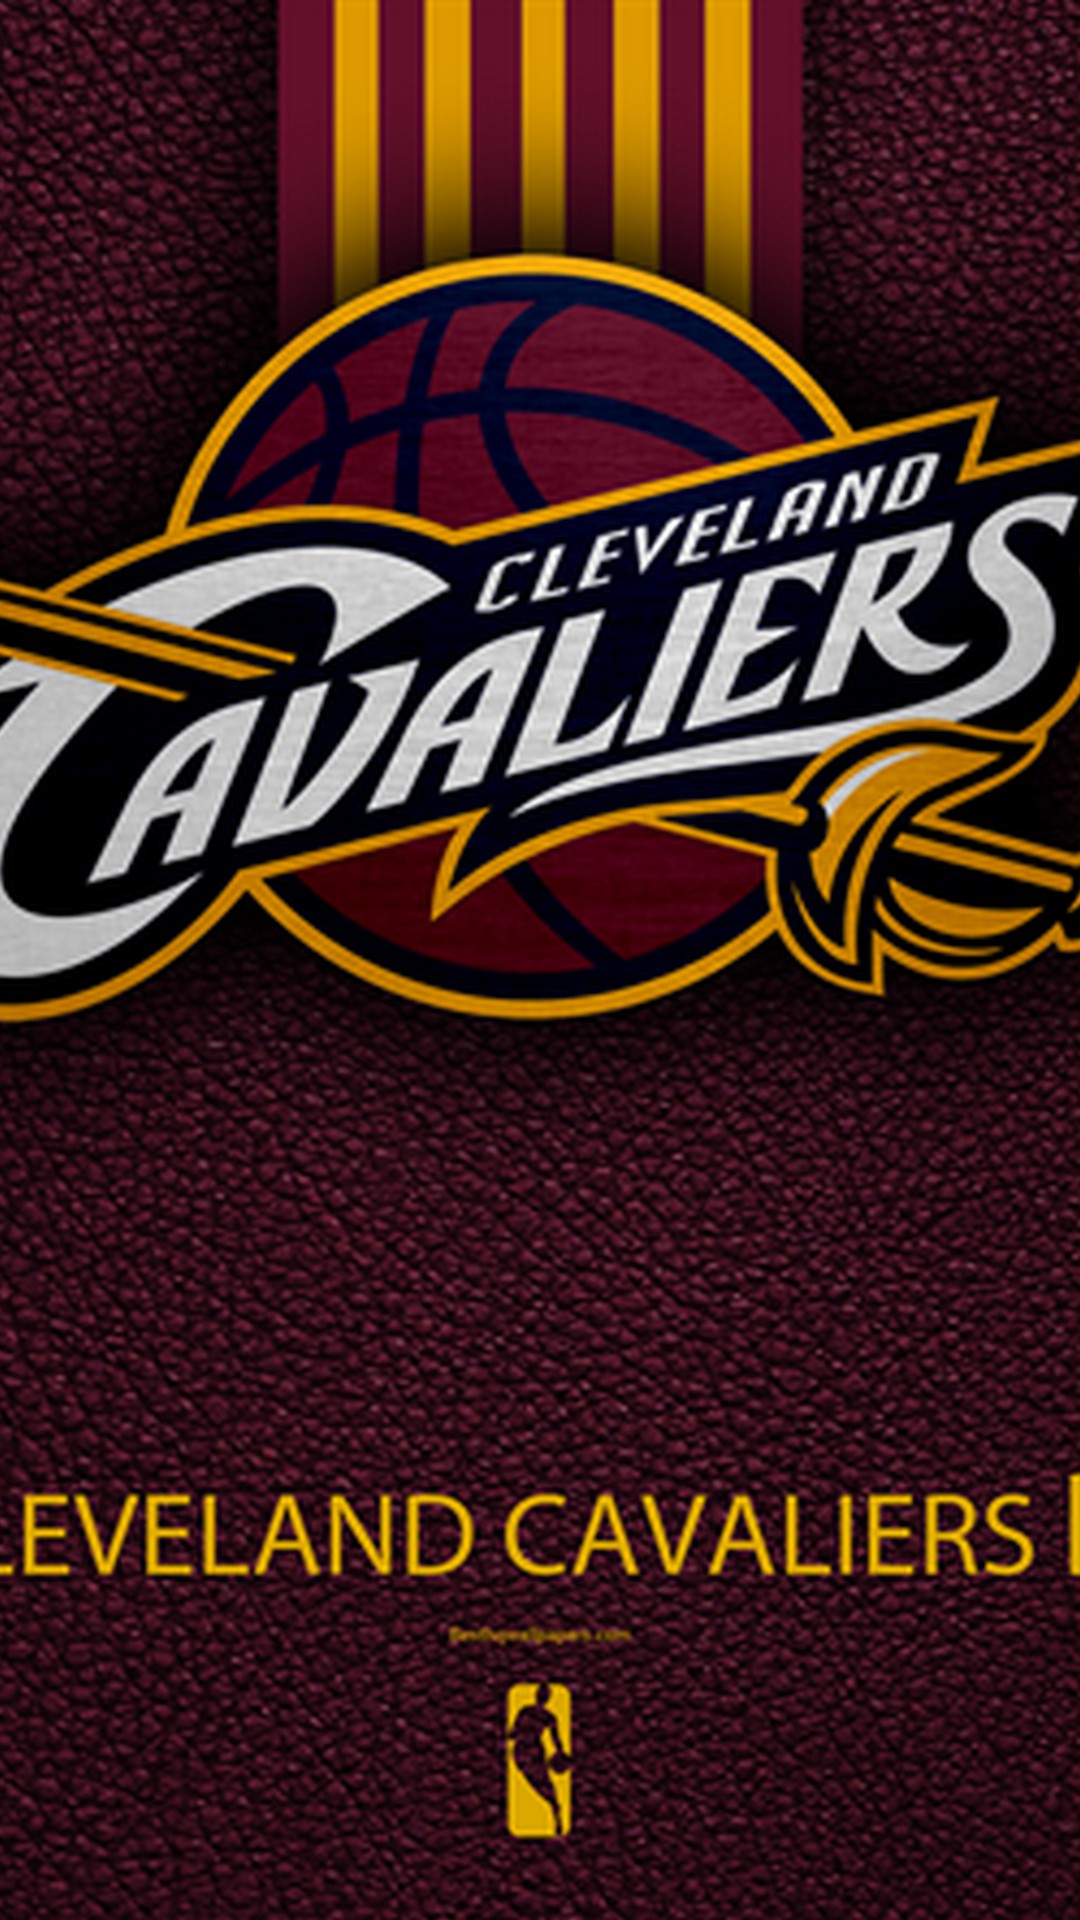 iPhone Wallpaper HD Cleveland Cavaliers 1080x1920